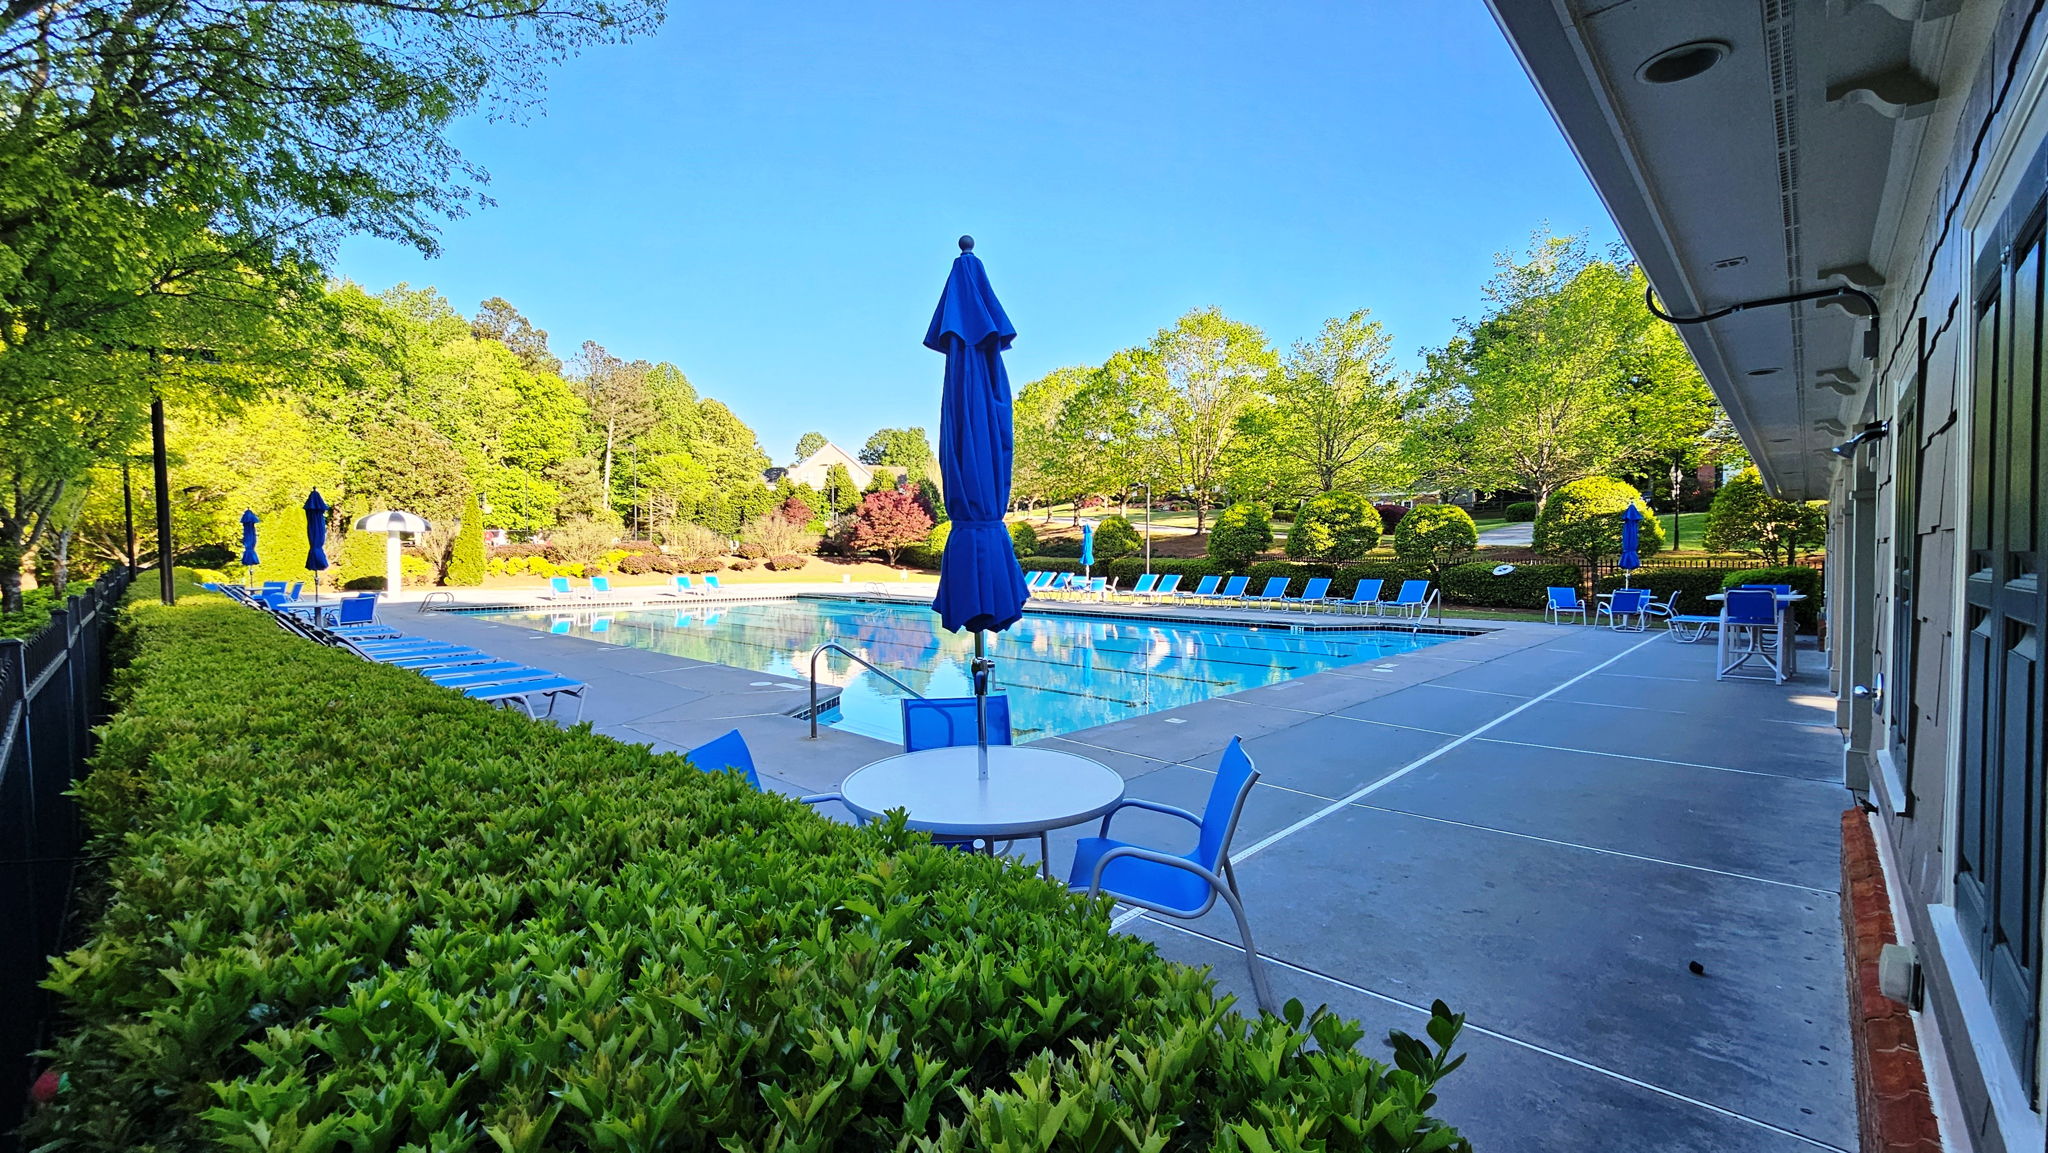 Bentwater Amenities - Bentwater Dr pool (1 of 5 Community Pools!)